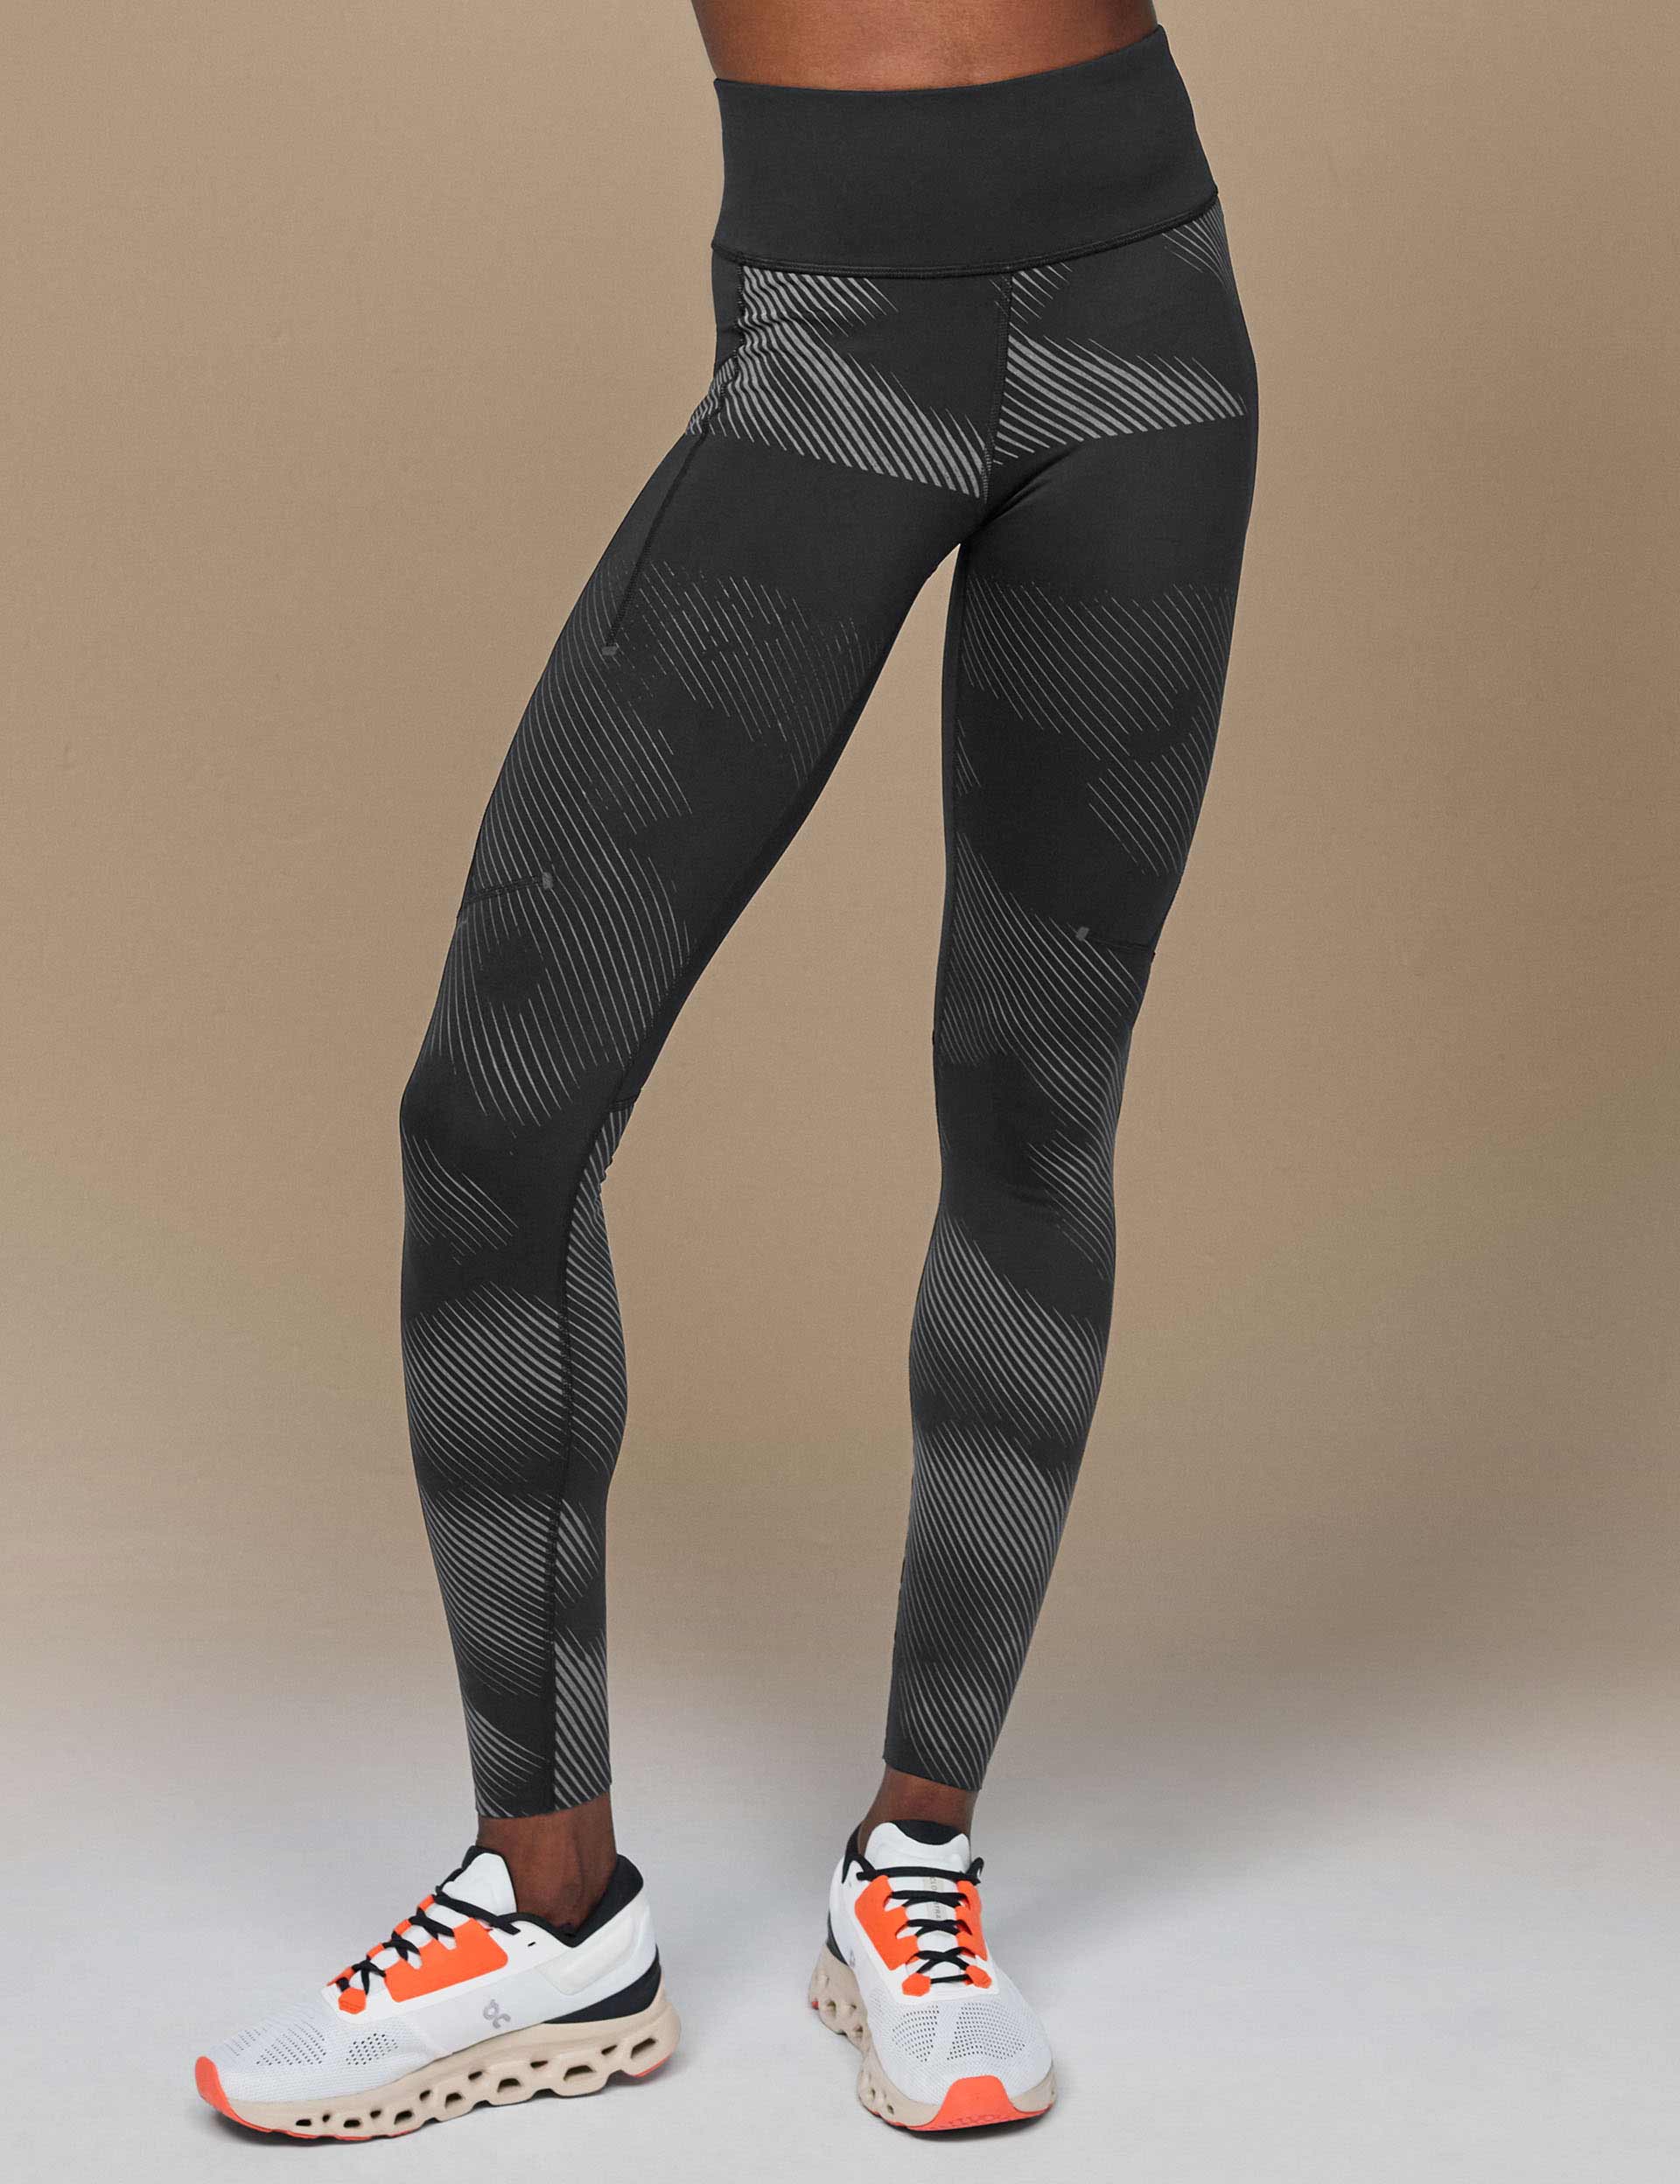 Staying Cool Performance Pants & Tights.